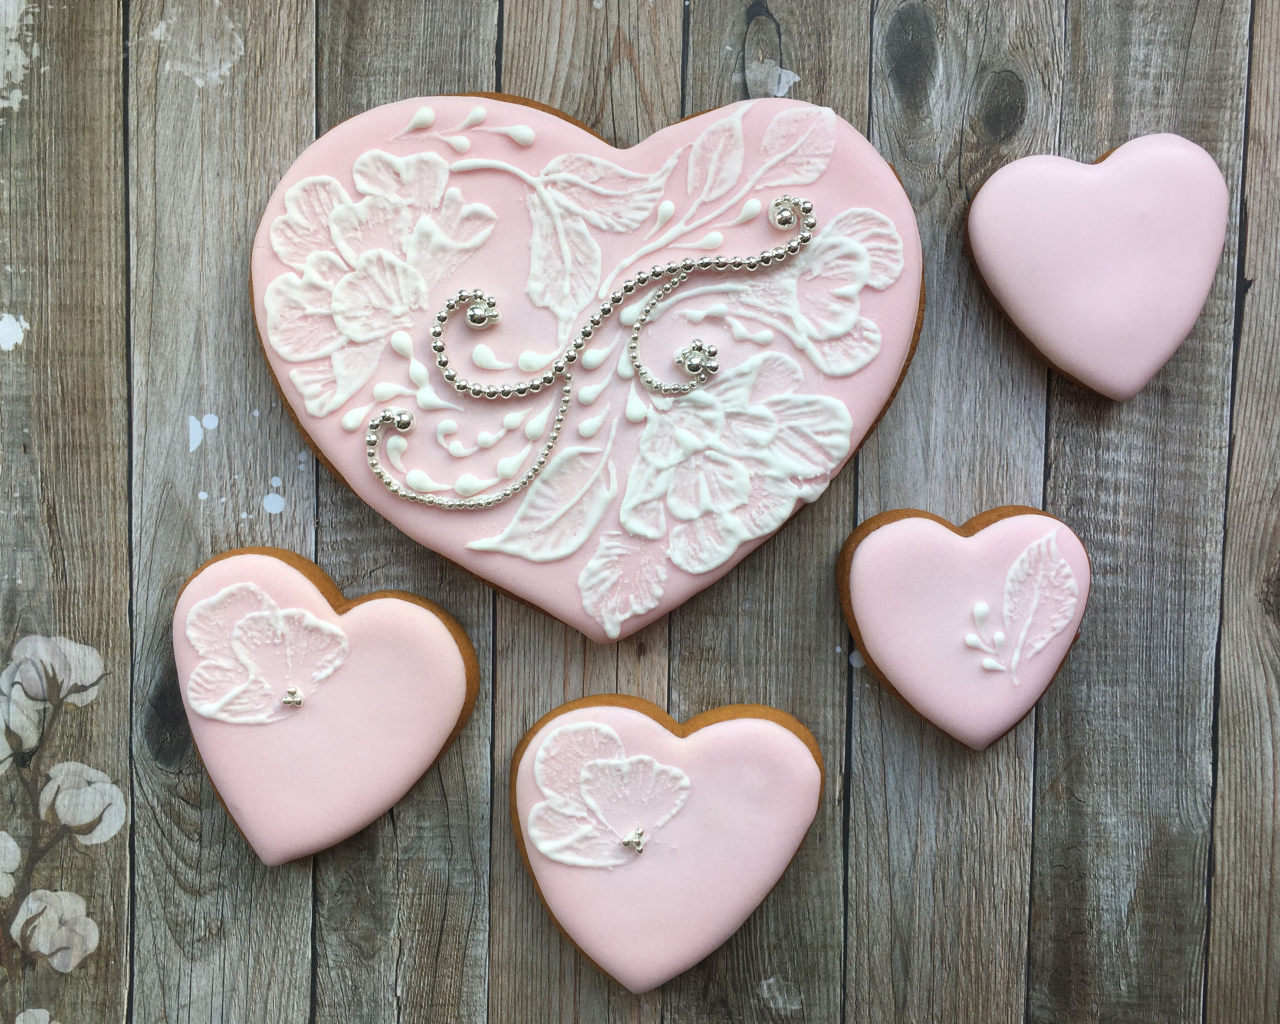 Heart shaped cookies with pink icing on the table